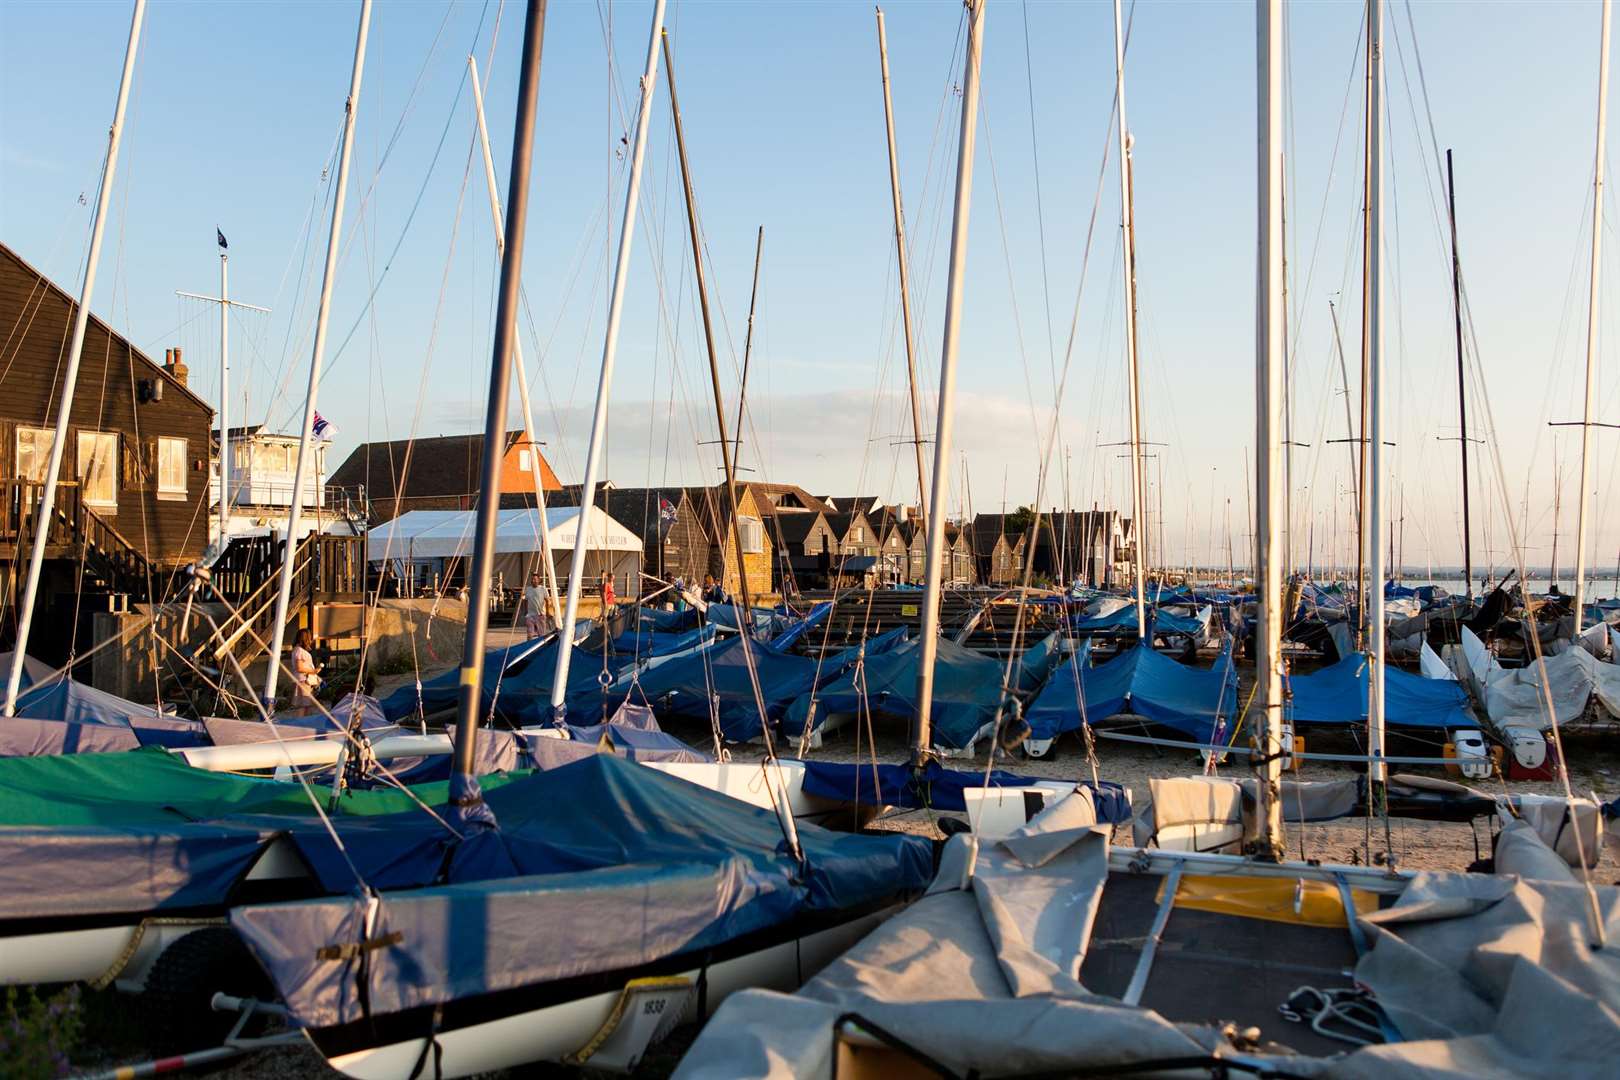 Push the Boat Out this weekend at sailing venues across the county including Whitstable Yacht Club, one of the oldest and largest sailing clubs in England